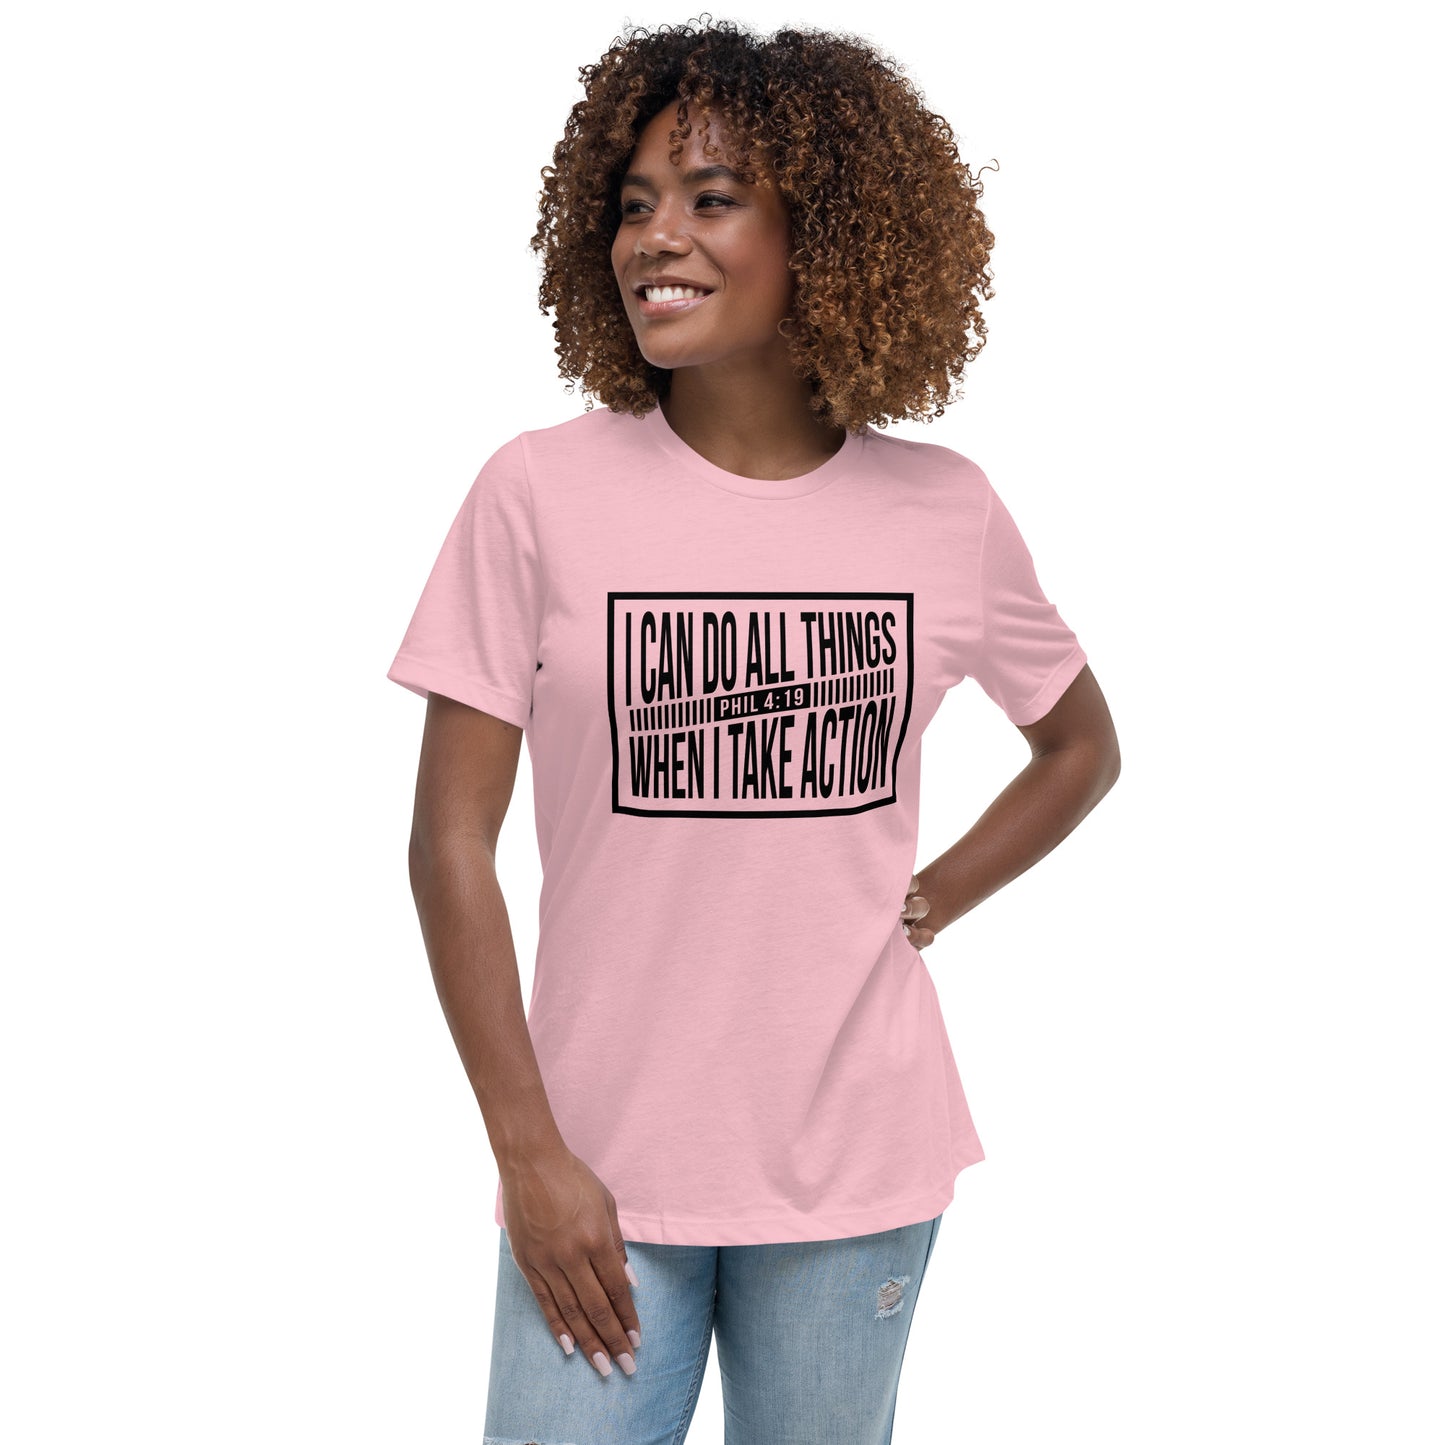 Women's Christian Tee - Soft & Comfy 'Phil 4:19: I Can Do All Things' Inspirational Shirt